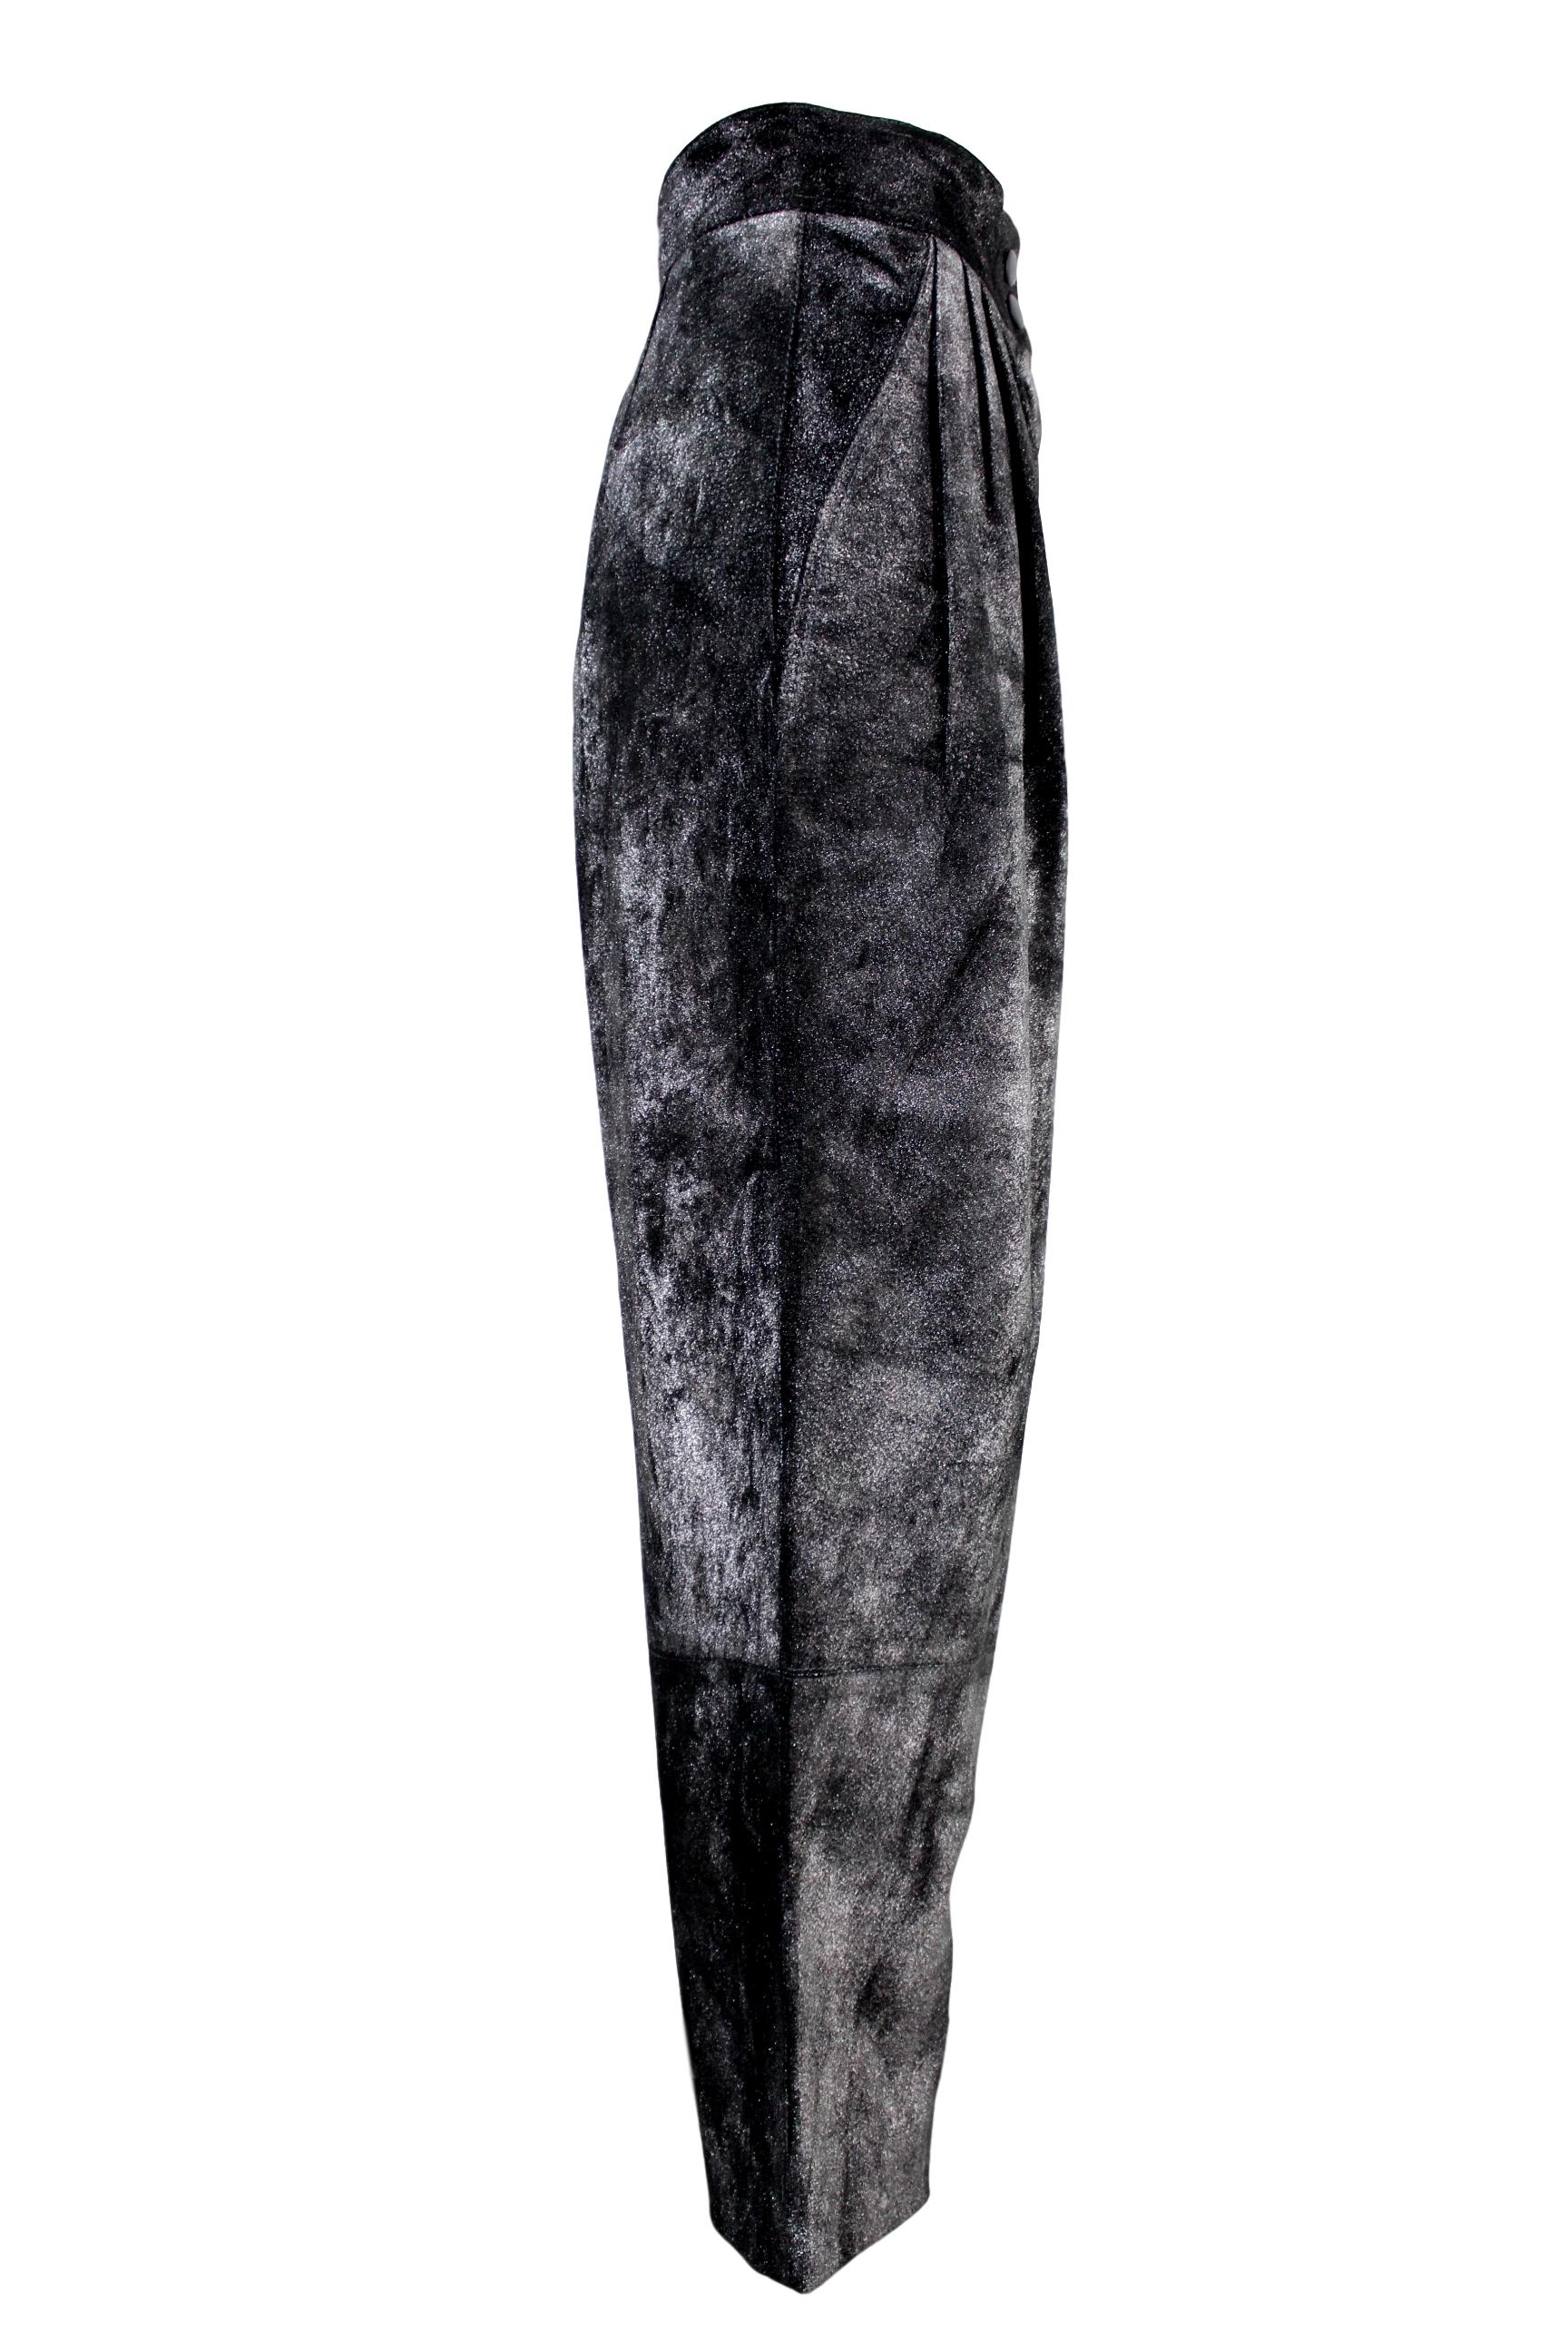 Krizia Black and Silver Pigskin Leather Pants 1980s Lamè Iridescent Style NWT In New Condition For Sale In Brindisi, Bt